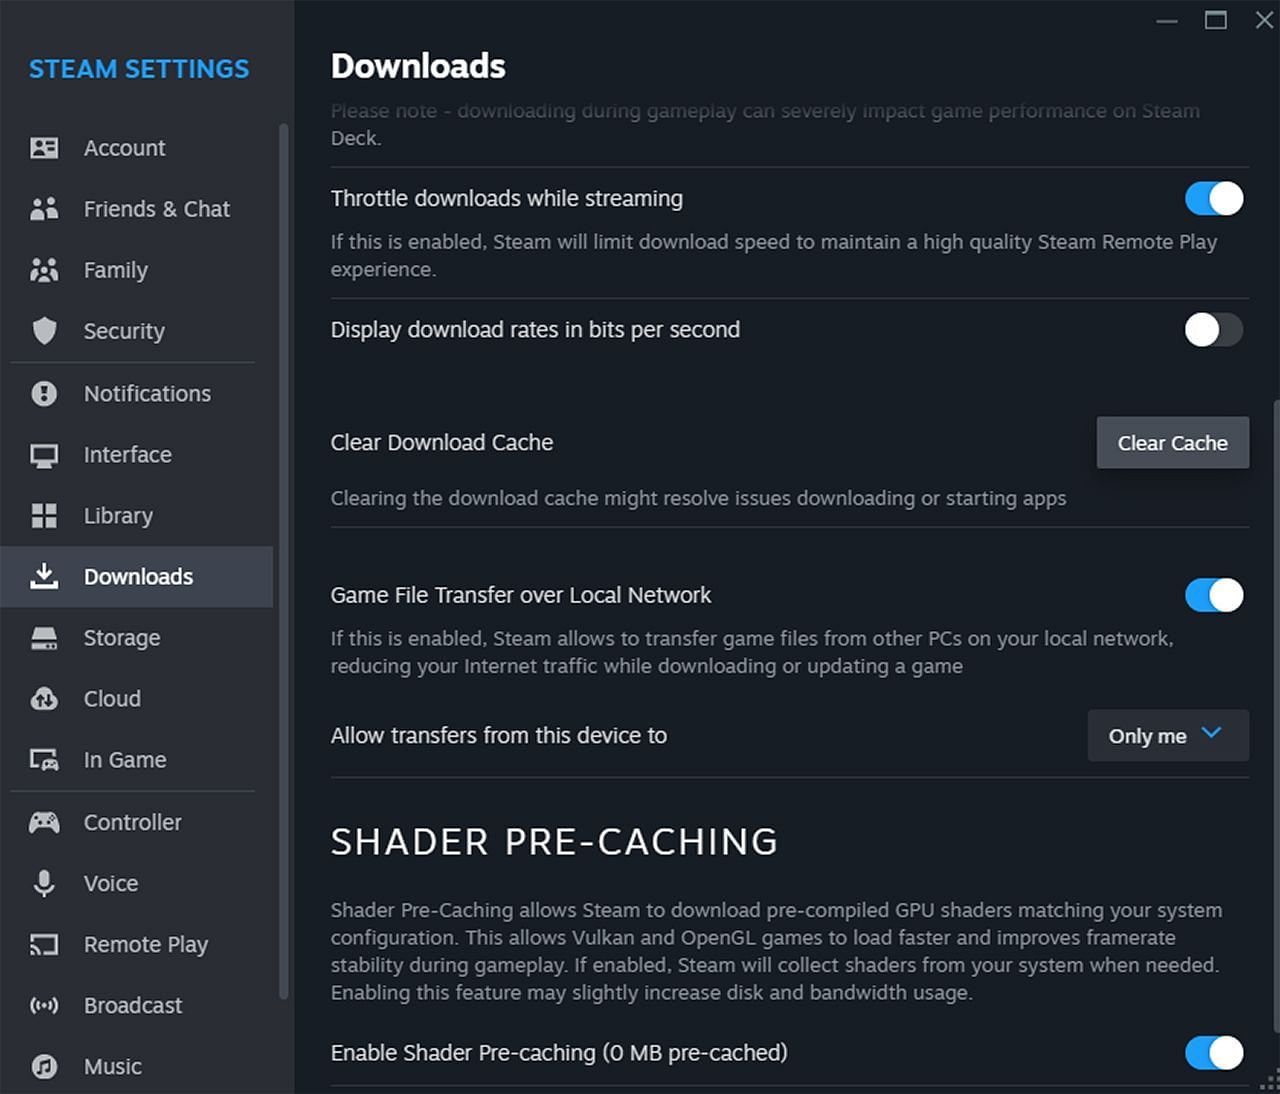 Clearing the Download Cache in Steam (Image via Valve)